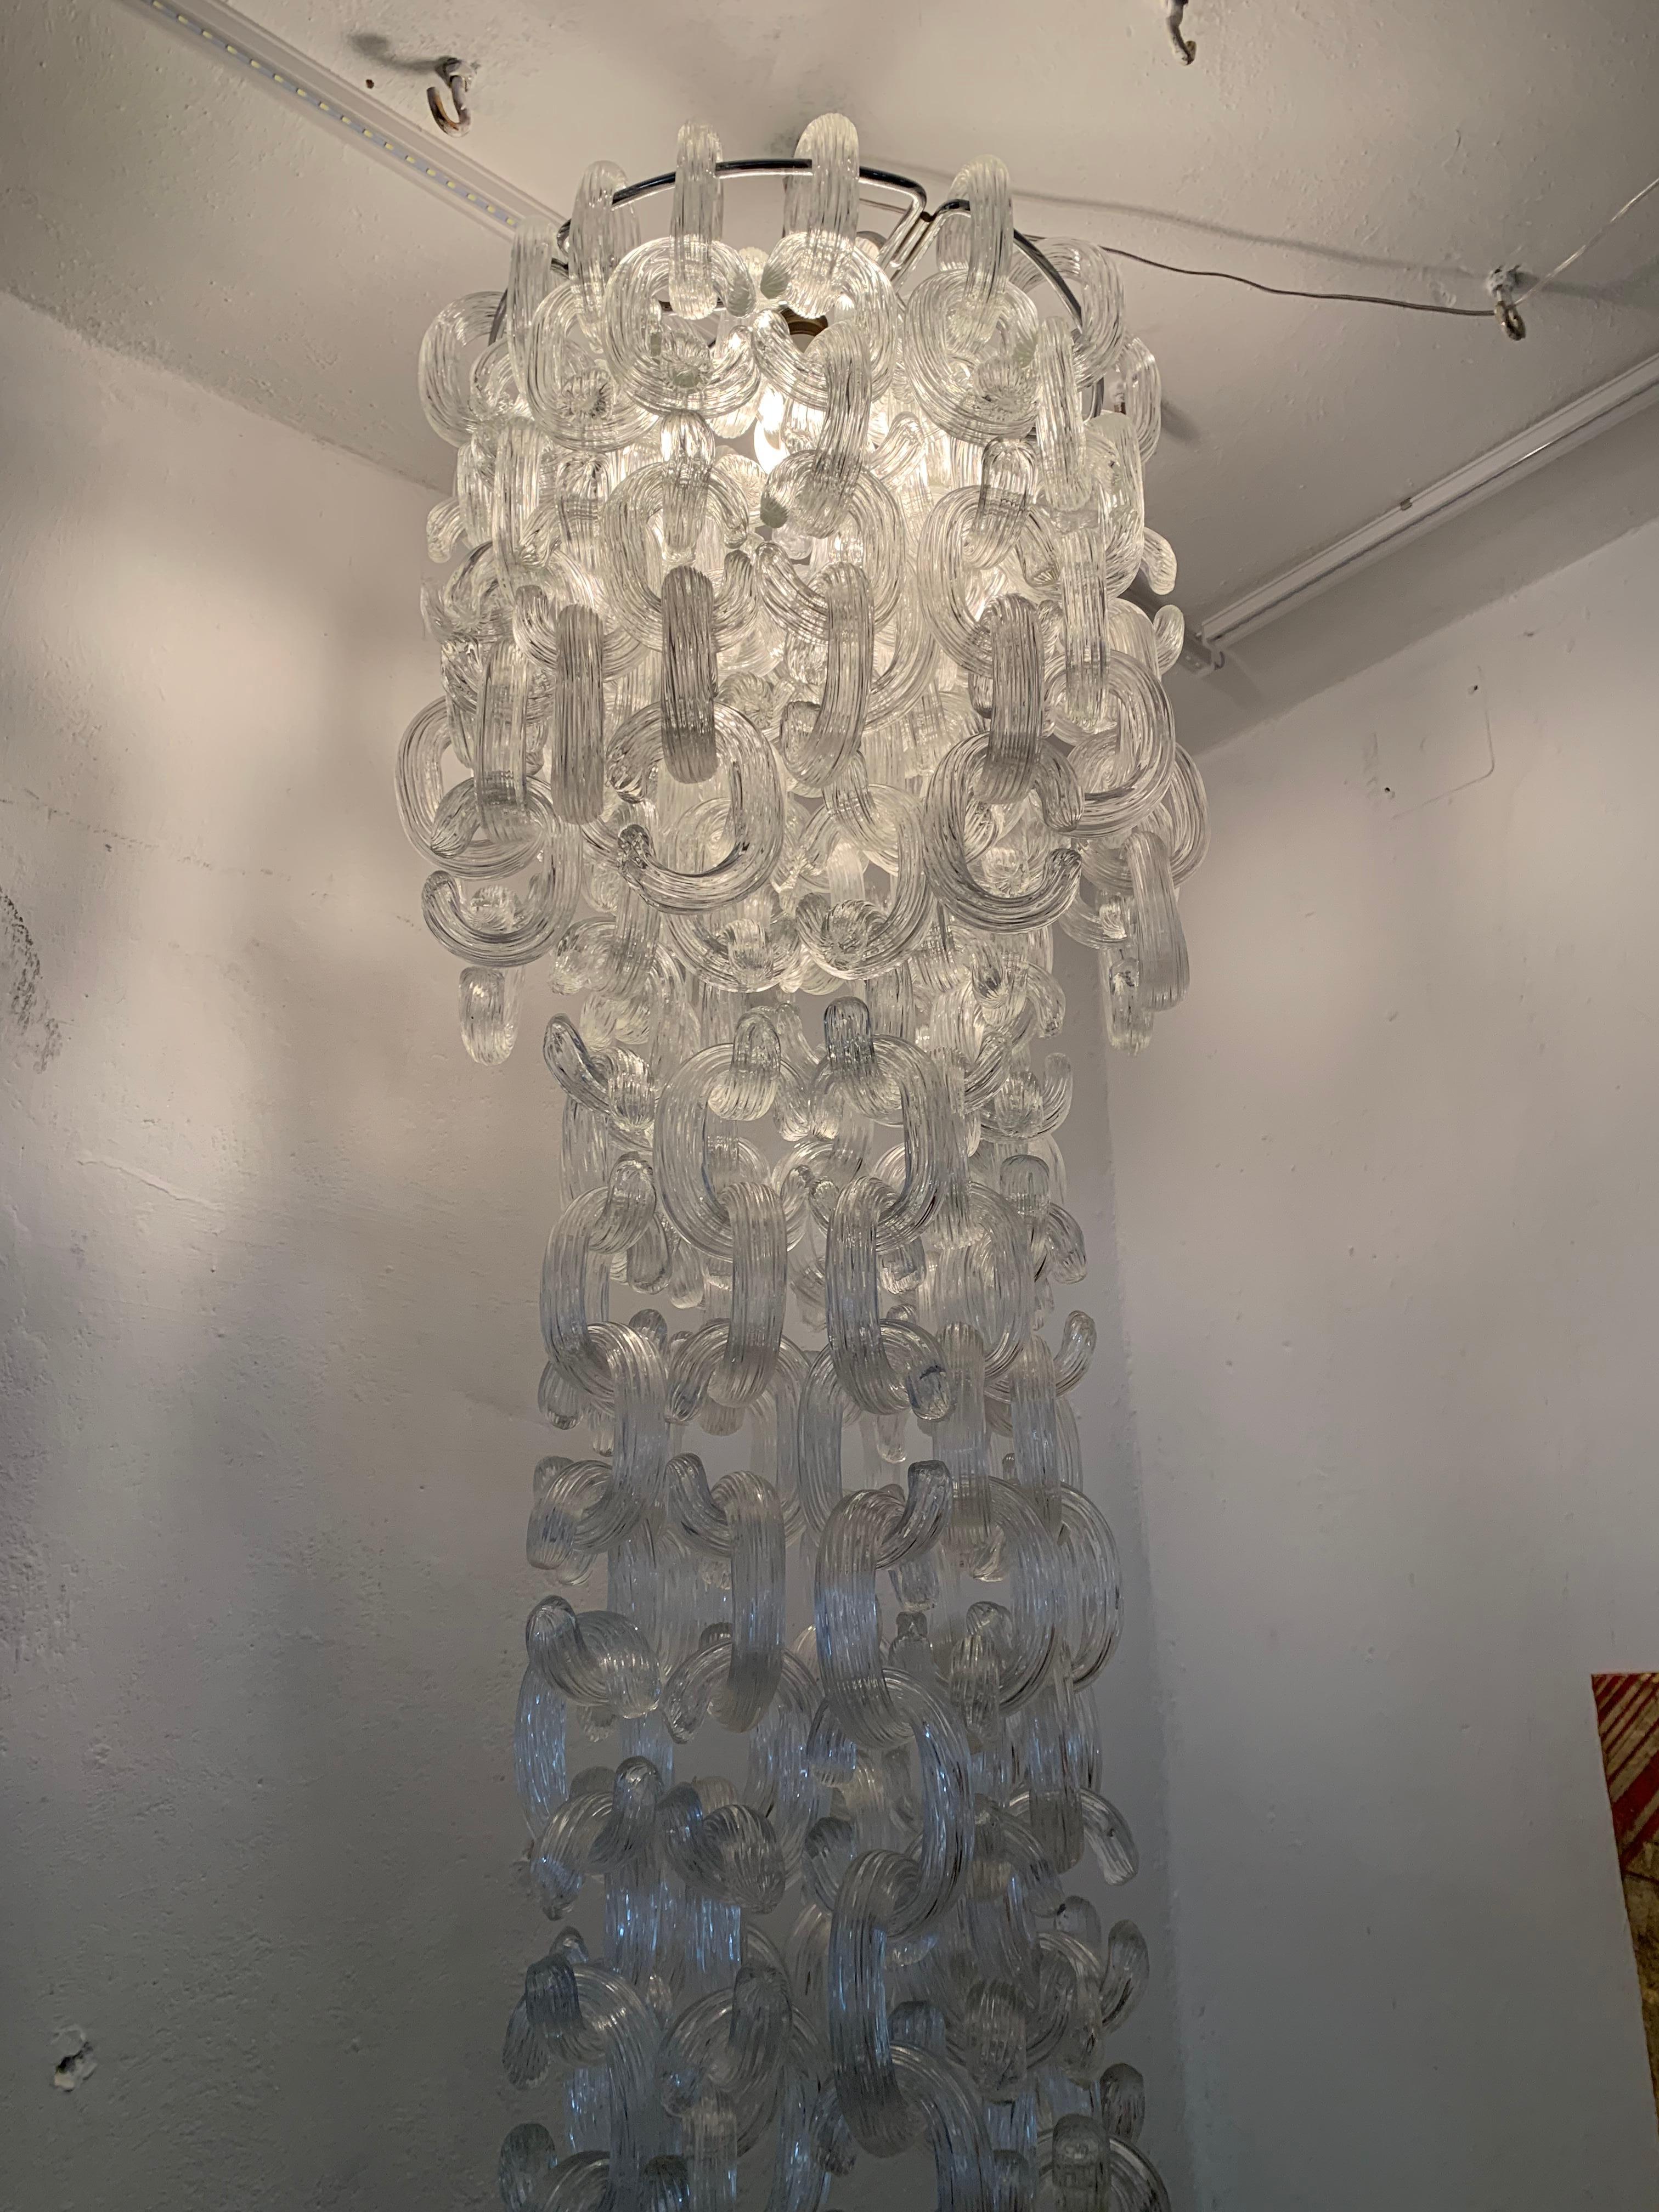 Blown Glass Very Large Mid-Century Modern Chandelier by Fratelli Toso, Giusto Toso, 1968 For Sale